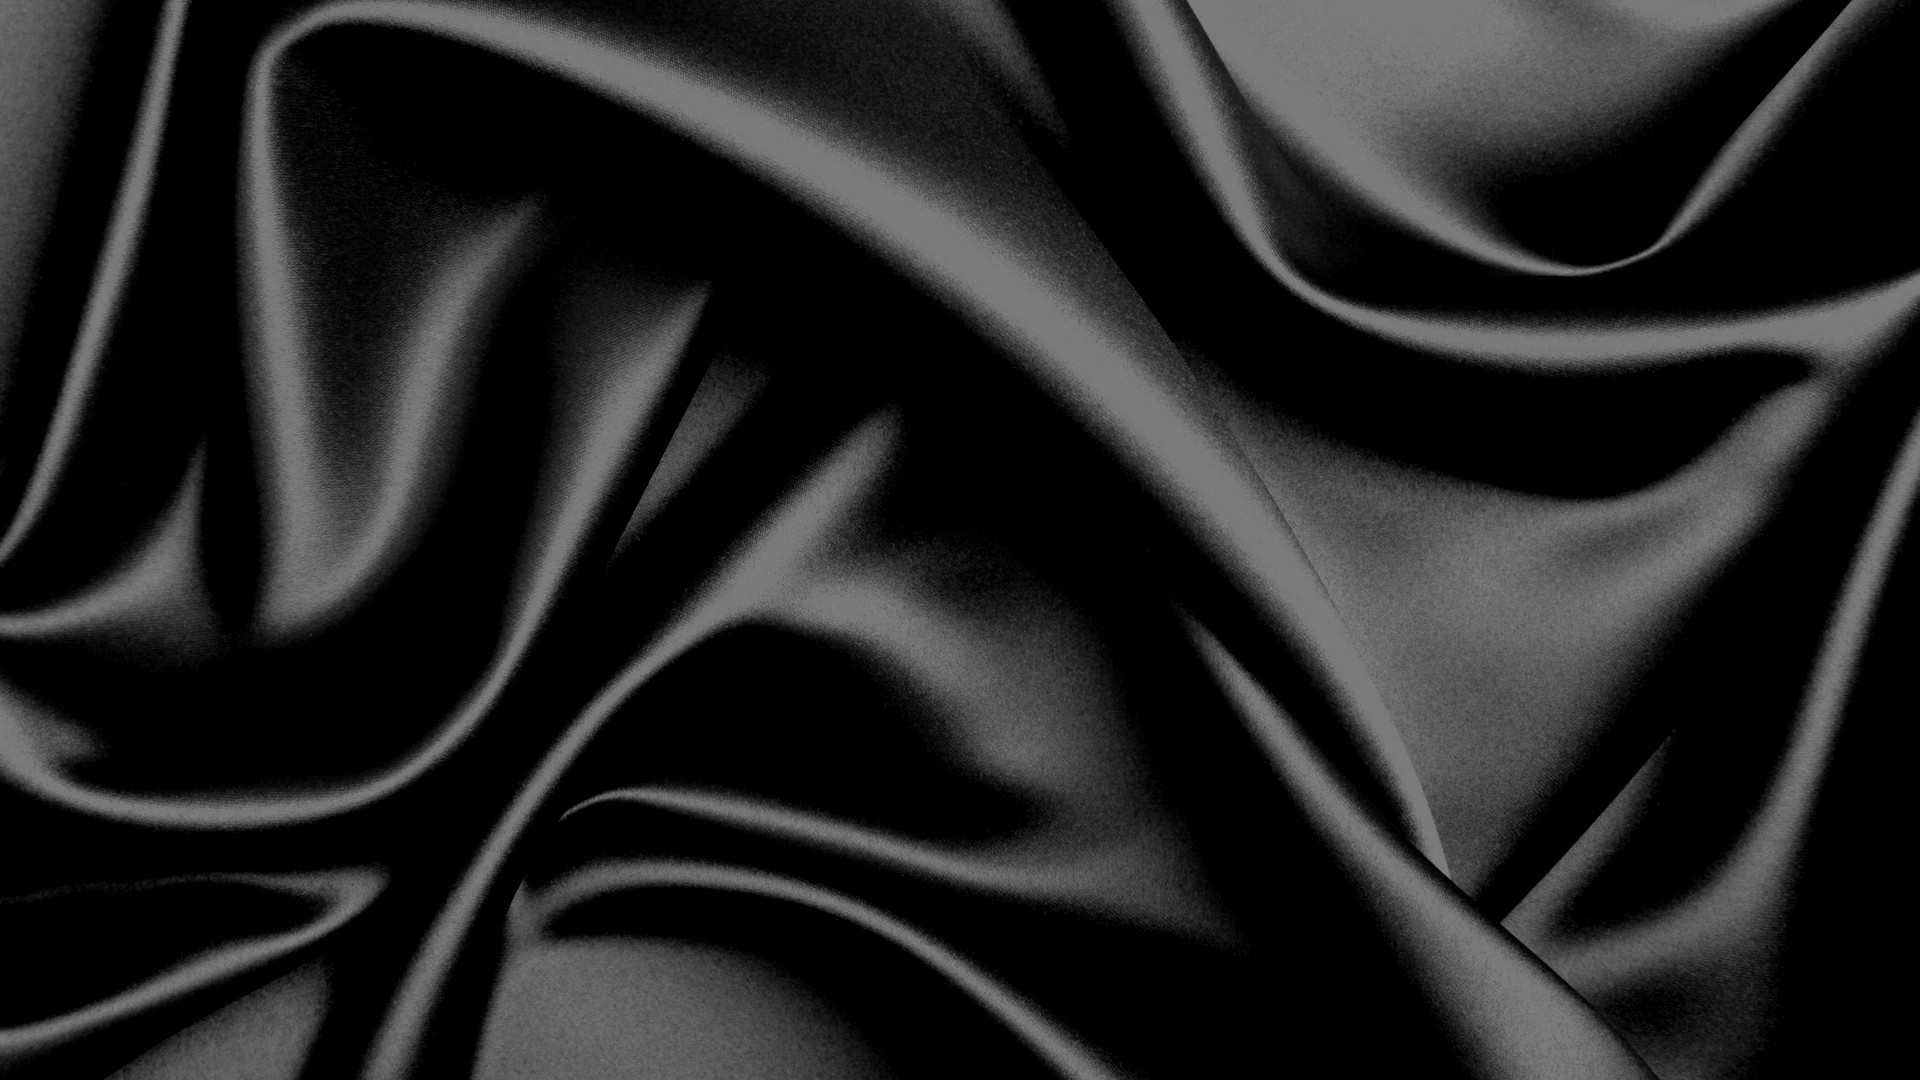 Black Silk iPhone Screen Lock Wallpaper with high-resolution 1920x1080 pixel. You can set as wallpaper for Apple iPhone X, XS Max, XR, 8, 7, 6, SE, iPad. Enjoy and share your favorite HD wallpapers and background images